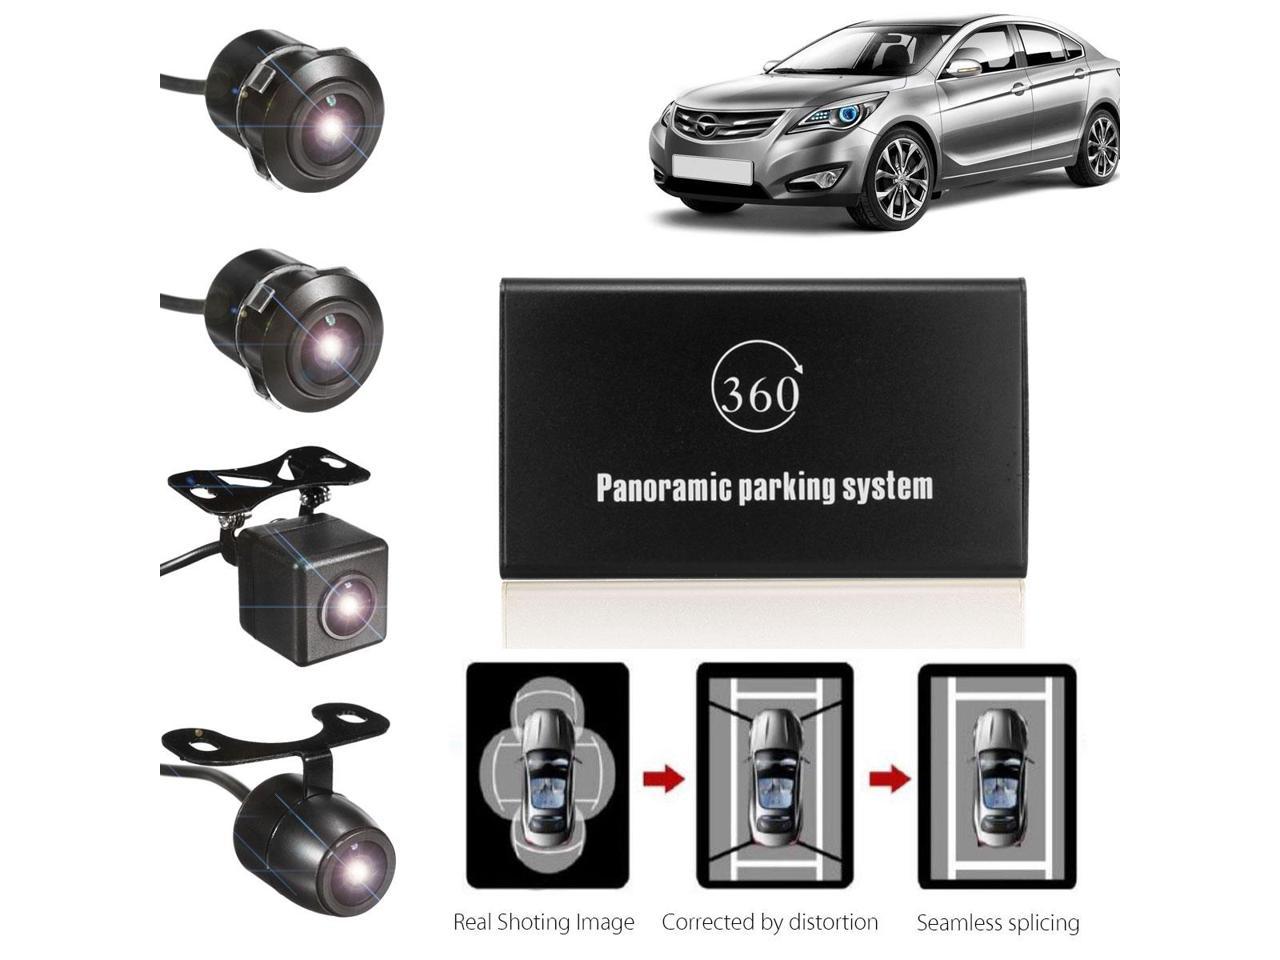 Auto Parking Panoramic View Rearview Camera System 360 Degree View+4x Cameras